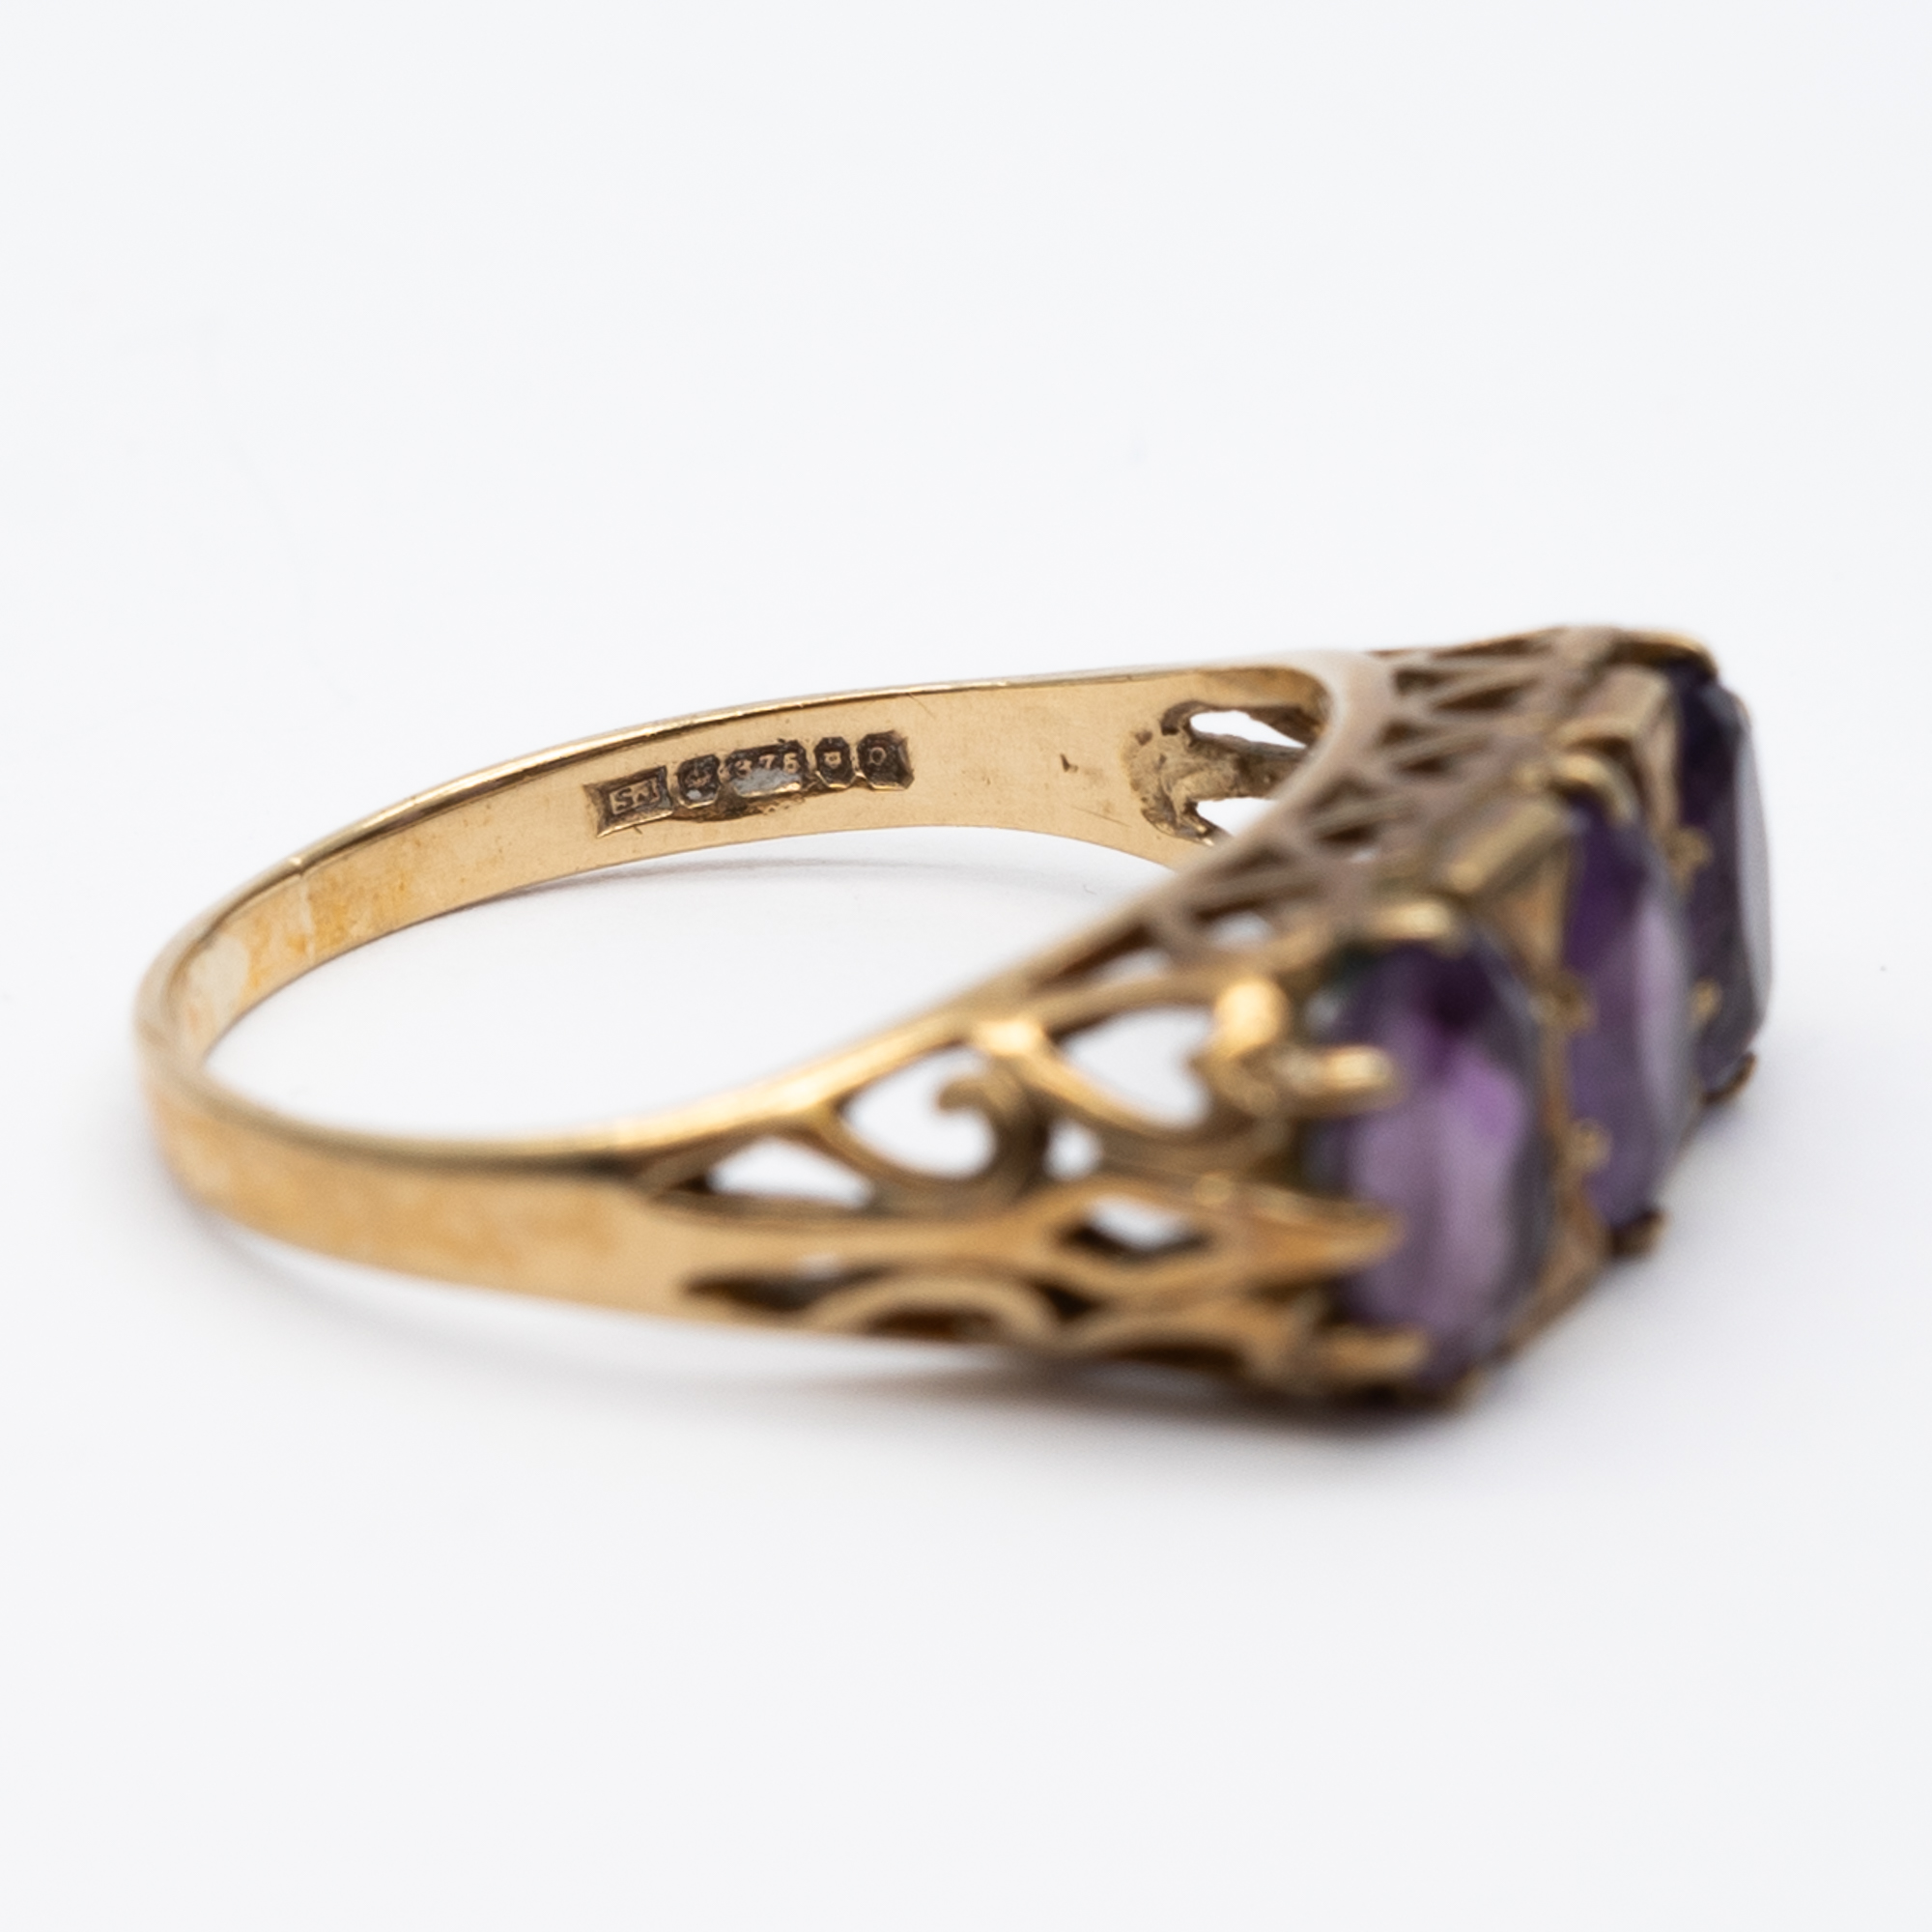 A 9ct yellow gold 3 stone amethyst ring - Image 6 of 6